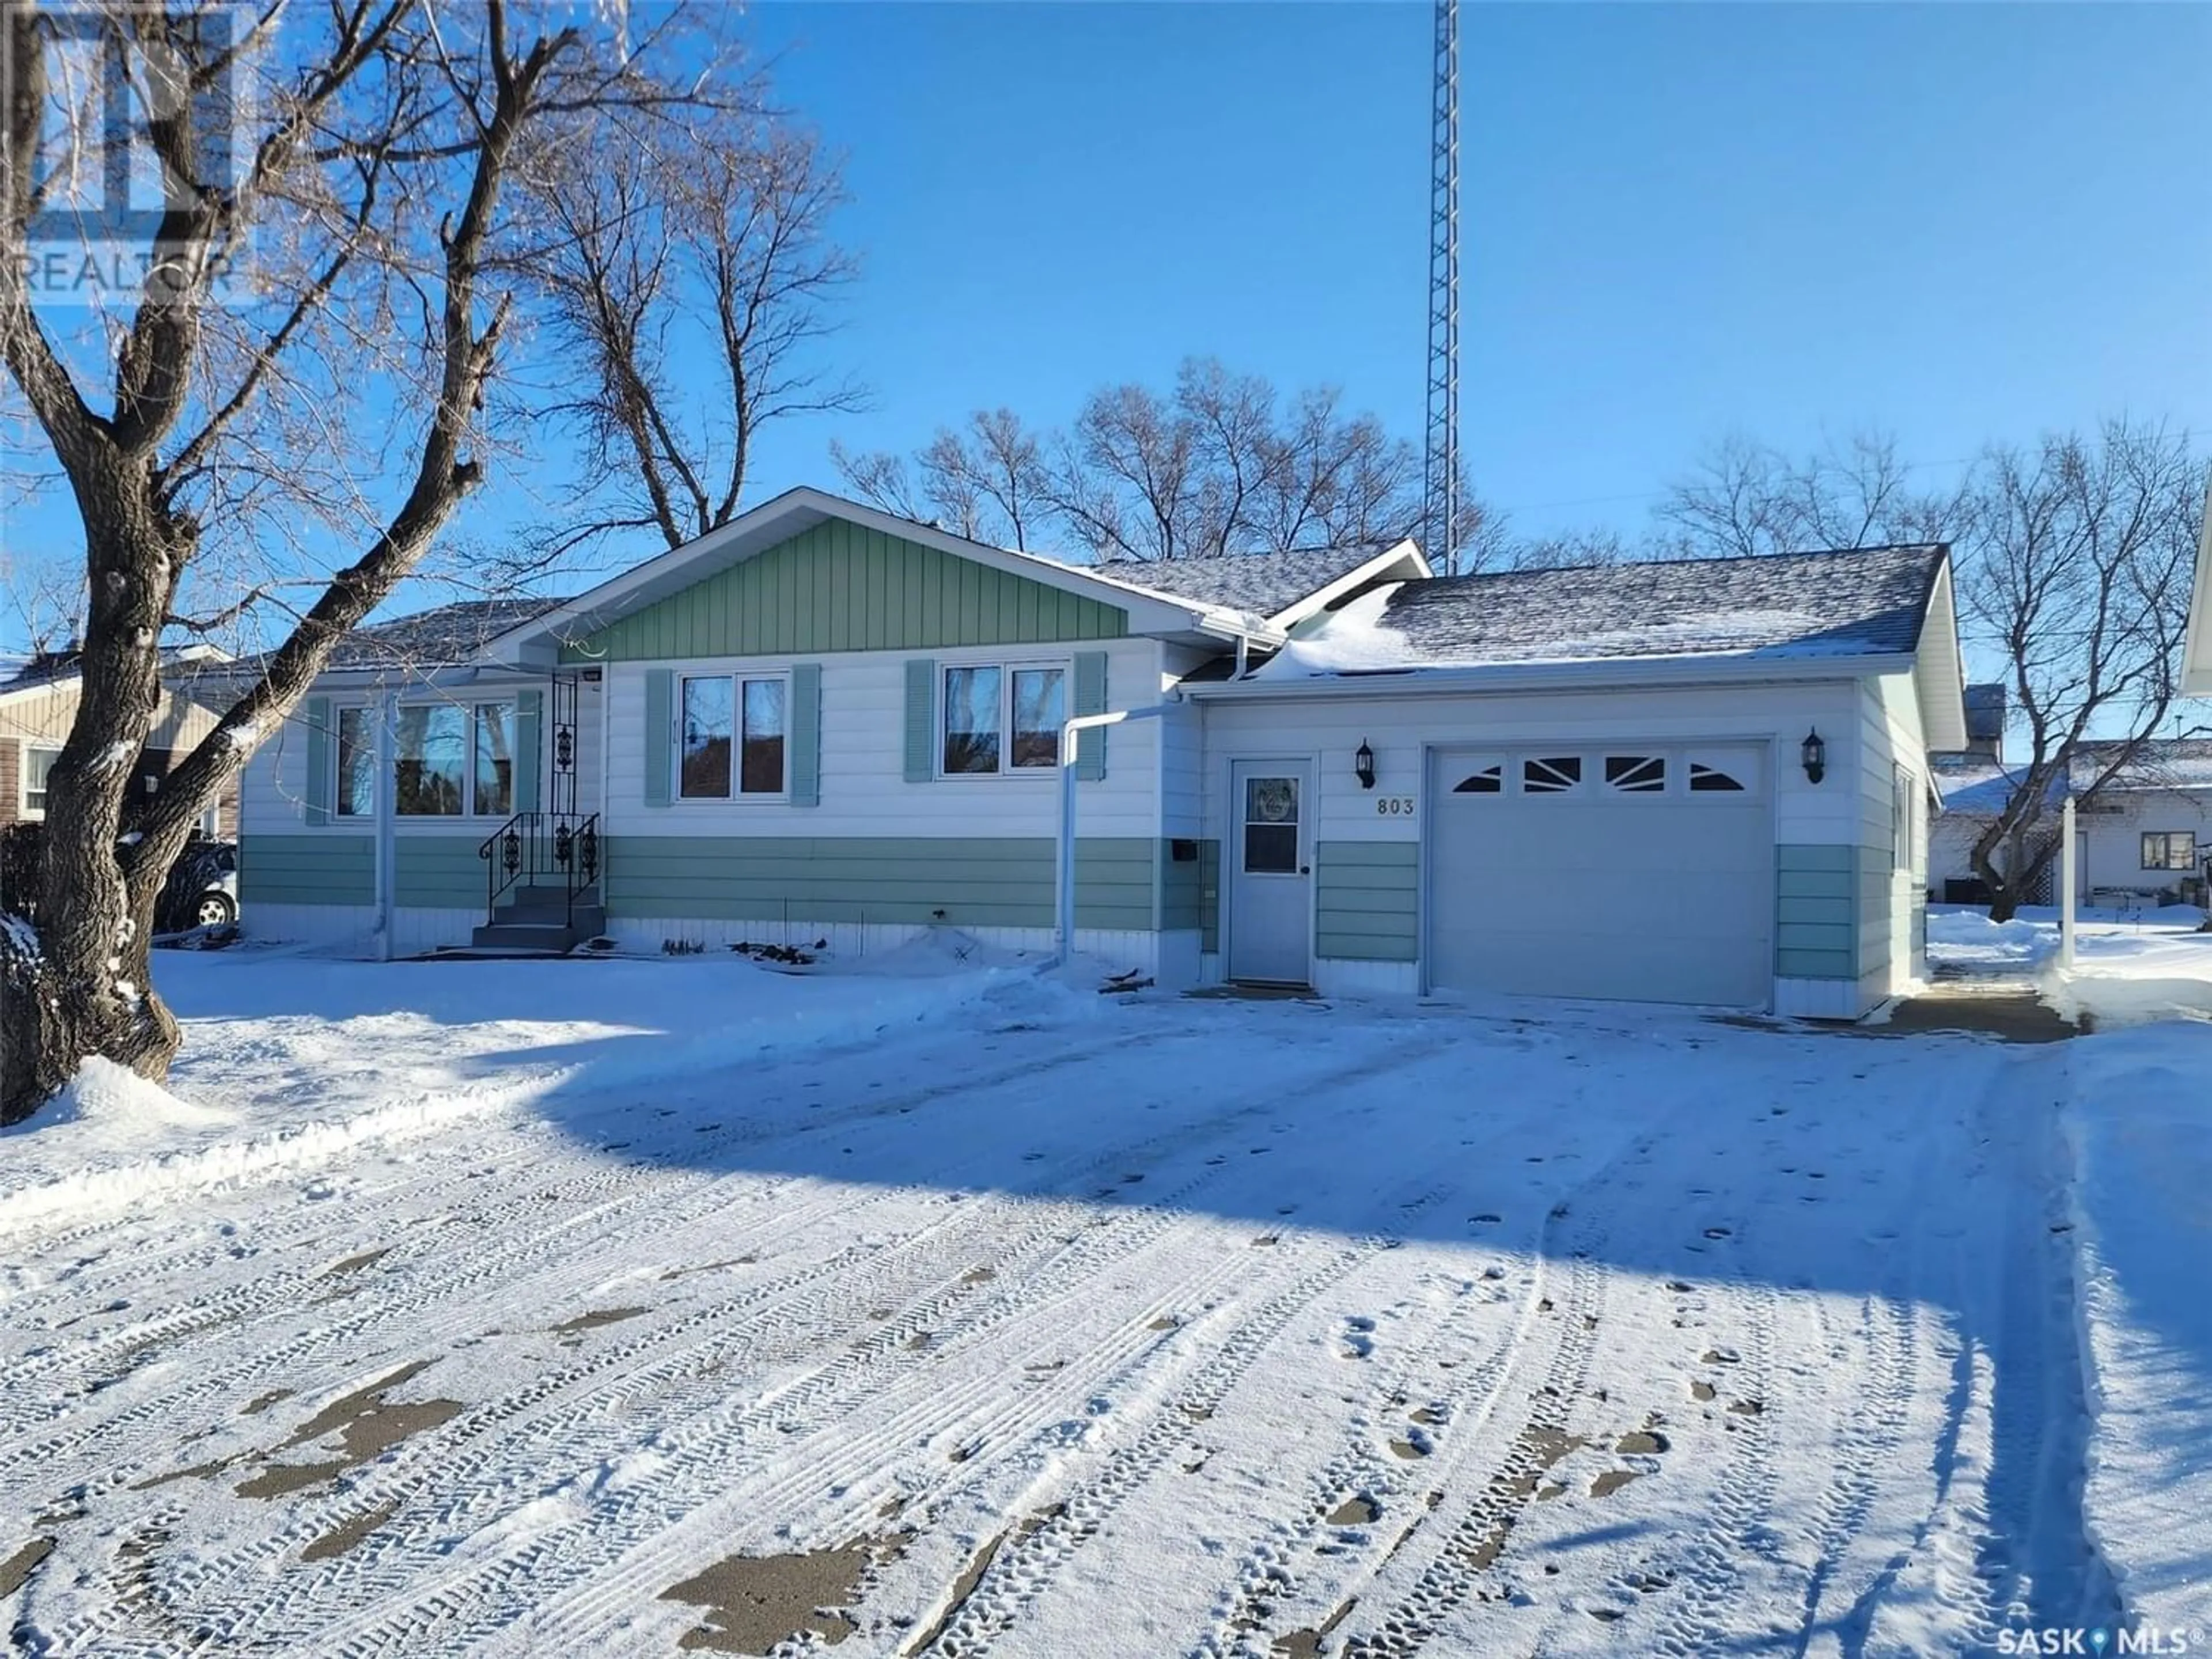 Home with unknown exterior material for 803 GREY AVENUE, Grenfell Saskatchewan S0G2B0